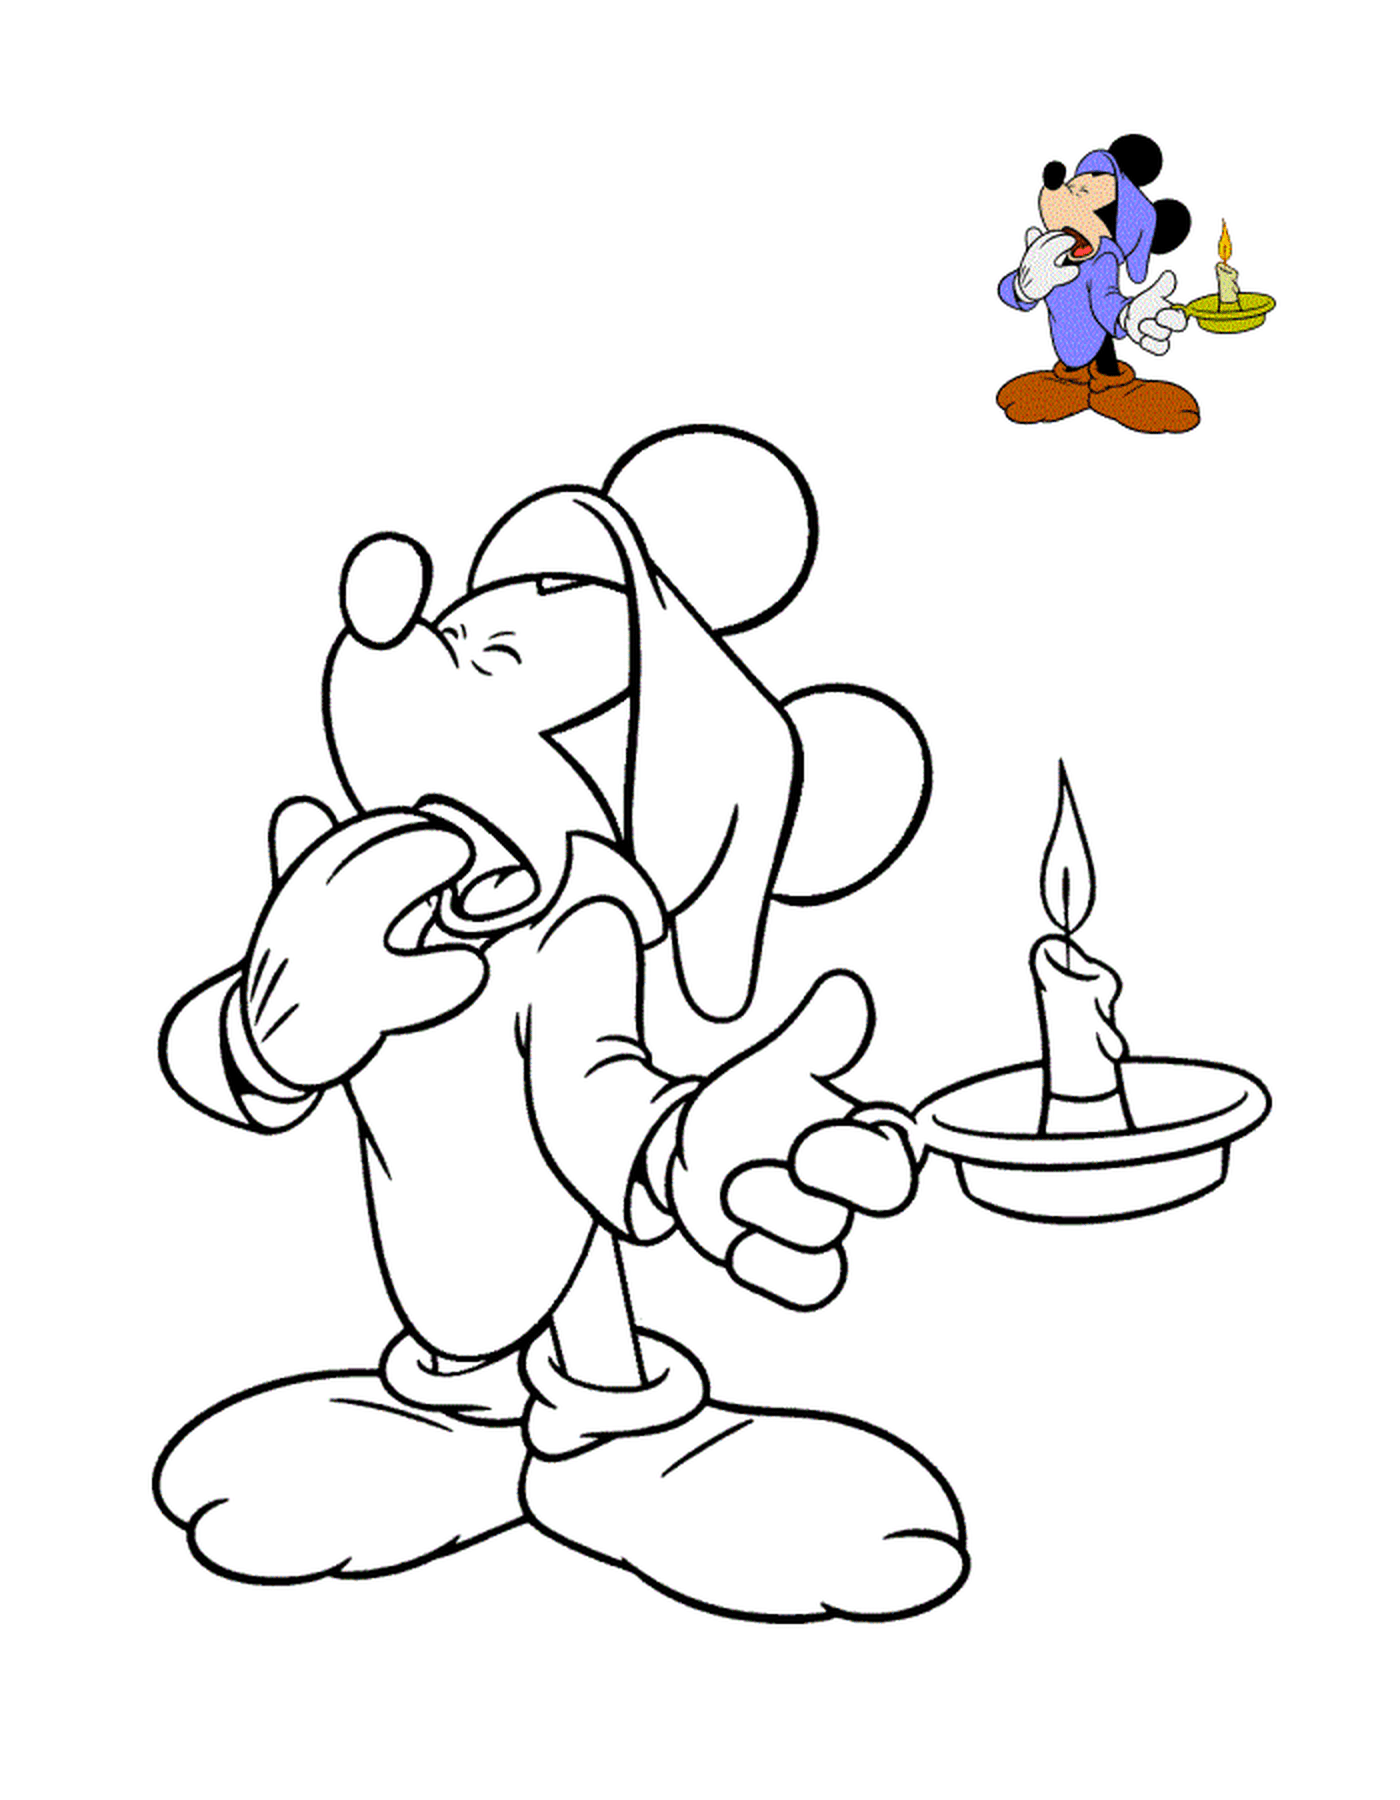  Mickey wants to sleep, holding a candle 